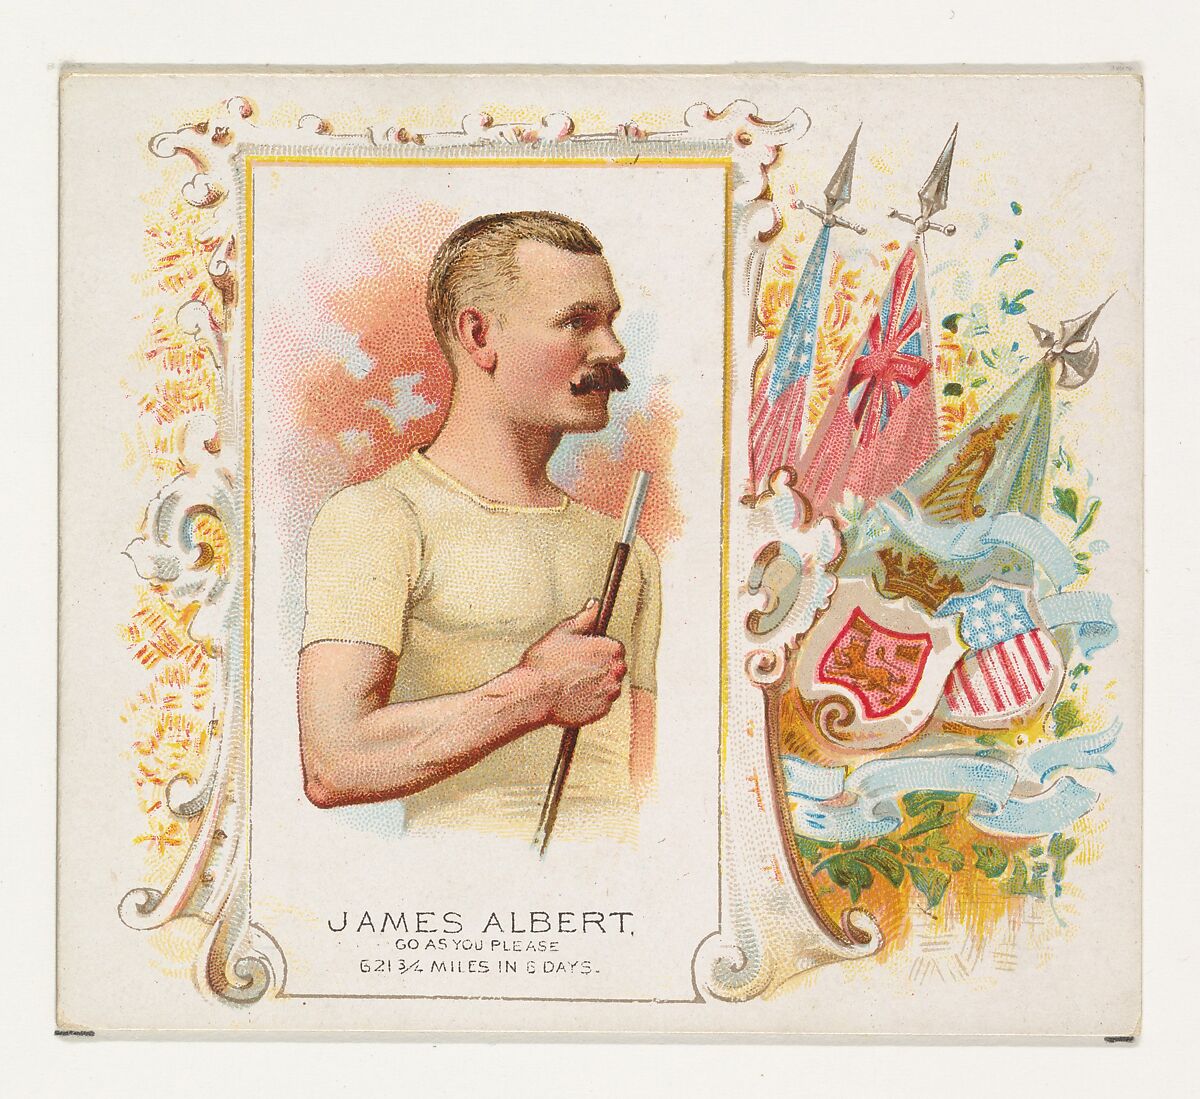 James Albert, Go As You Please, from World's Champions, Second Series (N43) for Allen & Ginter Cigarettes, Allen &amp; Ginter (American, Richmond, Virginia), Commercial lithograph 